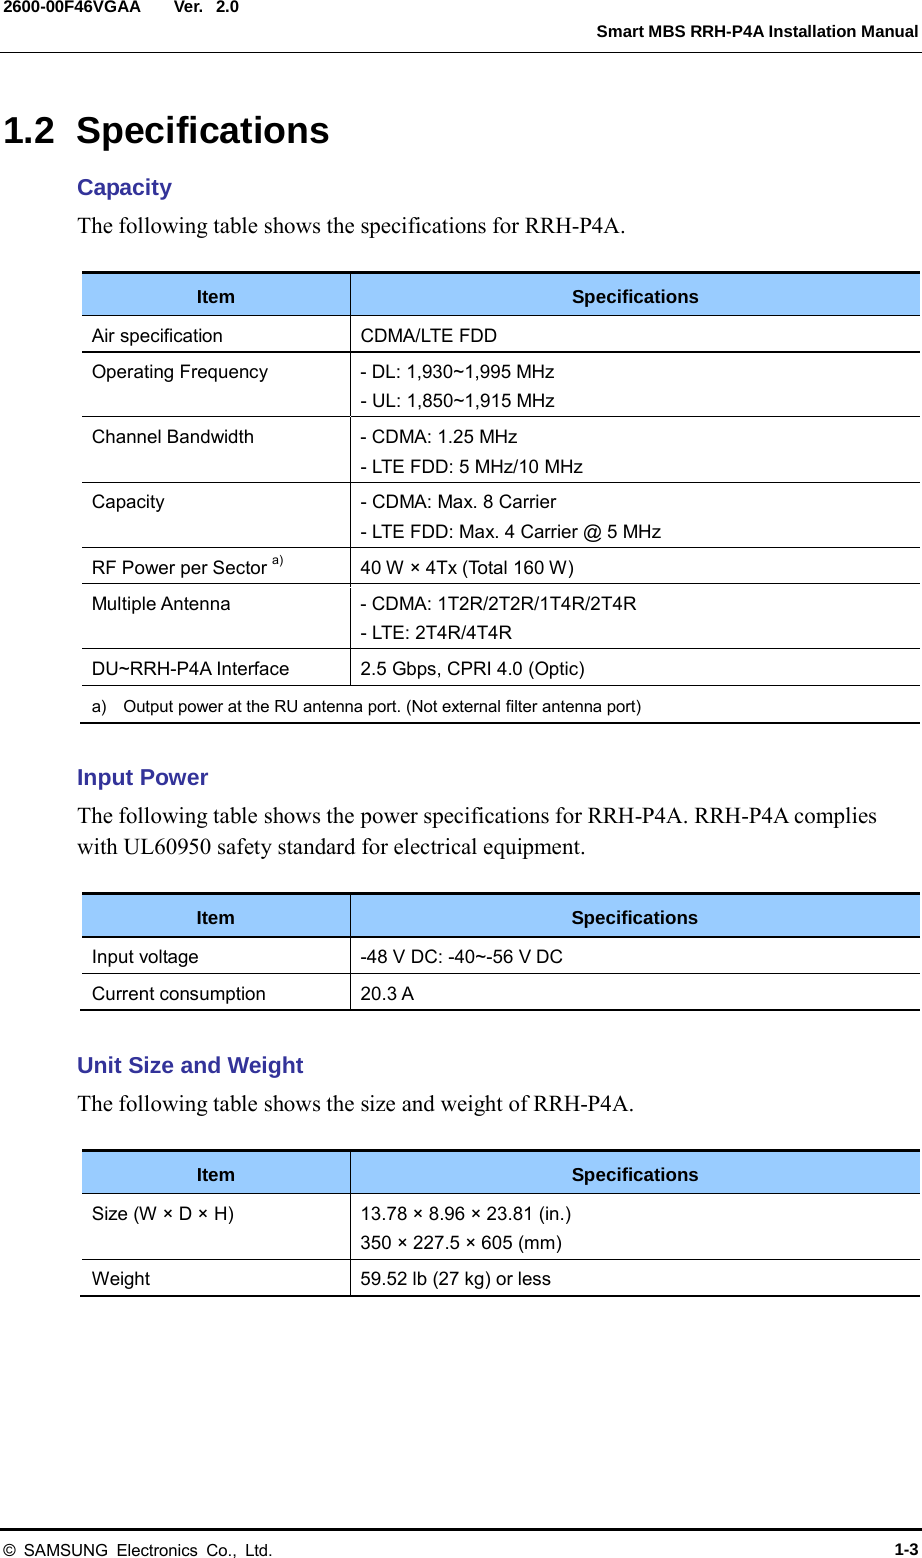  Ver.   Smart MBS RRH-P4A Installation Manual 2600-00F46VGAA 2.0 1.2 Specifications Capacity The following table shows the specifications for RRH-P4A.  Item  Specifications Air specification CDMA/LTE FDD Operating Frequency  - DL: 1,930~1,995 MHz - UL: 1,850~1,915 MHz Channel Bandwidth  - CDMA: 1.25 MHz - LTE FDD: 5 MHz/10 MHz Capacity  - CDMA: Max. 8 Carrier - LTE FDD: Max. 4 Carrier @ 5 MHz RF Power per Sector a) 40 W × 4Tx (Total 160 W) Multiple Antenna    - CDMA: 1T2R/2T2R/1T4R/2T4R - LTE: 2T4R/4T4R DU~RRH-P4A Interface 2.5 Gbps, CPRI 4.0 (Optic) a)   Output power at the RU antenna port. (Not external filter antenna port)  Input Power The following table shows the power specifications for RRH-P4A. RRH-P4A complies with UL60950 safety standard for electrical equipment.  Item  Specifications Input voltage   -48 V DC: -40~-56 V DC Current consumption 20.3 A  Unit Size and Weight The following table shows the size and weight of RRH-P4A.  Item  Specifications Size (W × D × H)  13.78 × 8.96 × 23.81 (in.) 350 × 227.5 × 605 (mm) Weight 59.52 lb (27 kg) or less  © SAMSUNG Electronics Co., Ltd. 1-3 